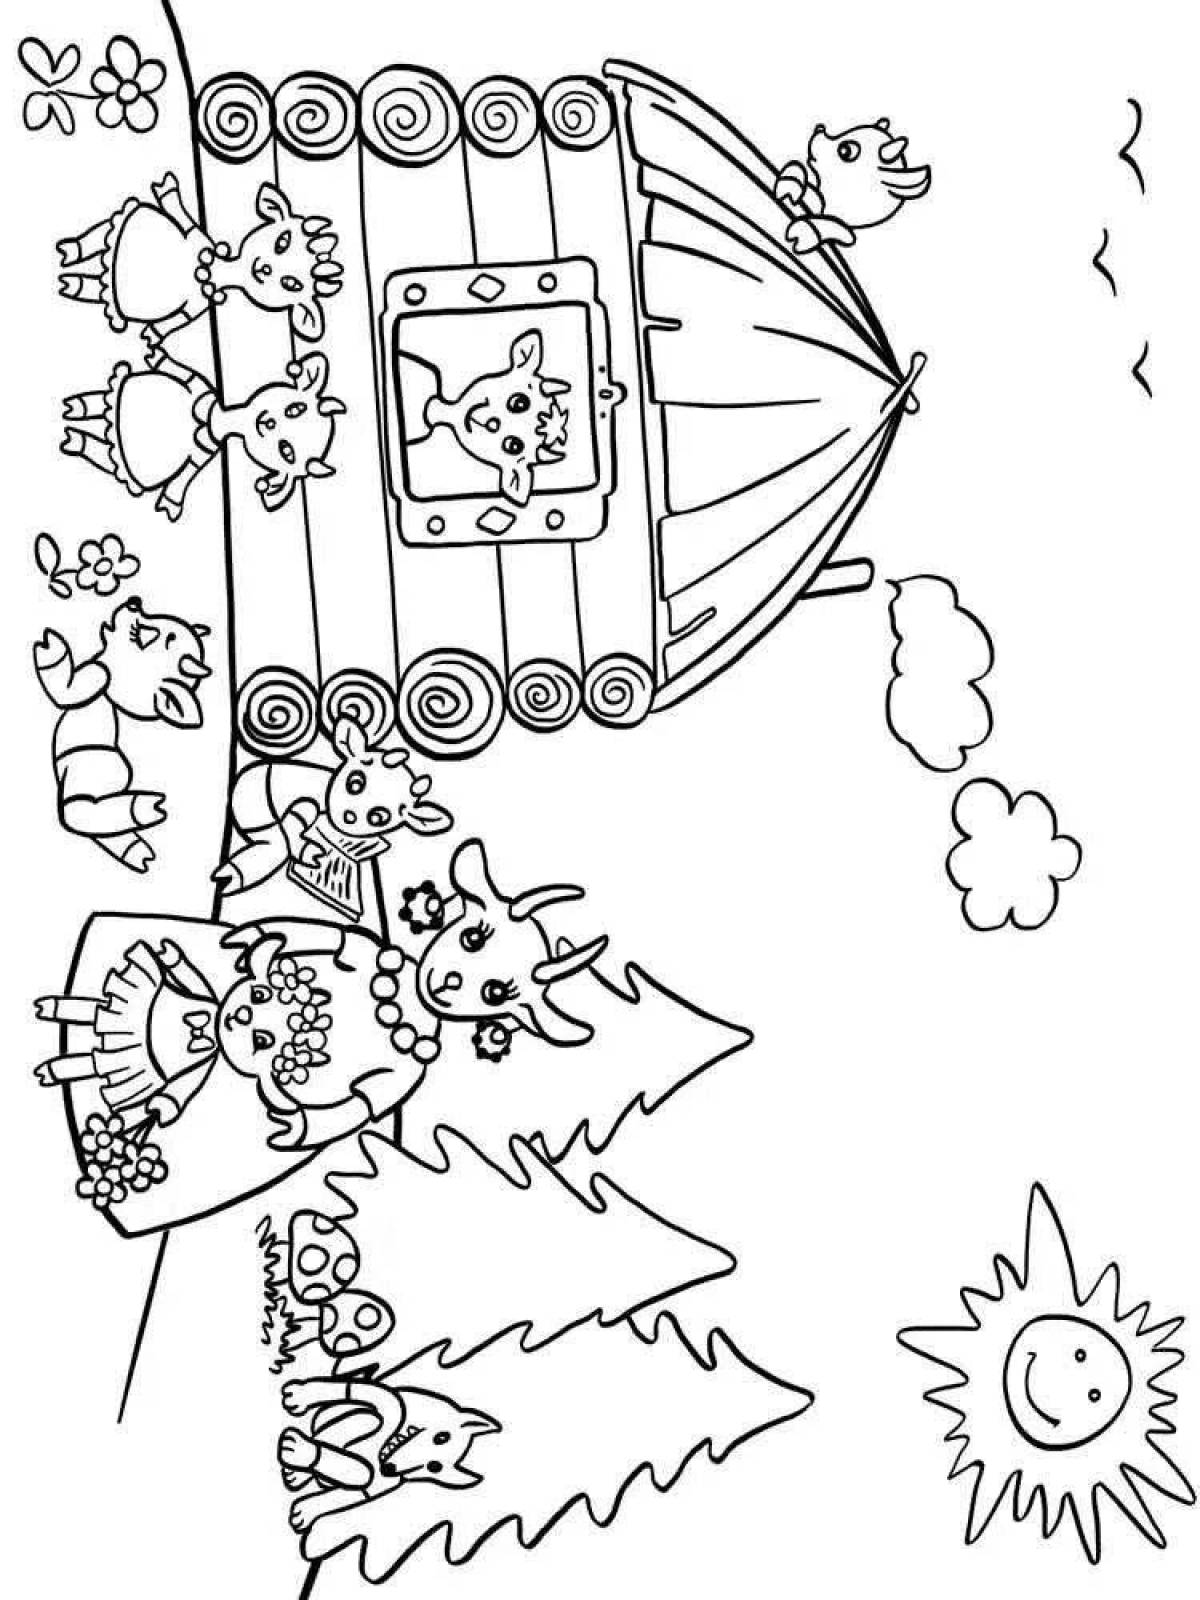 Coloring pages page 7 children